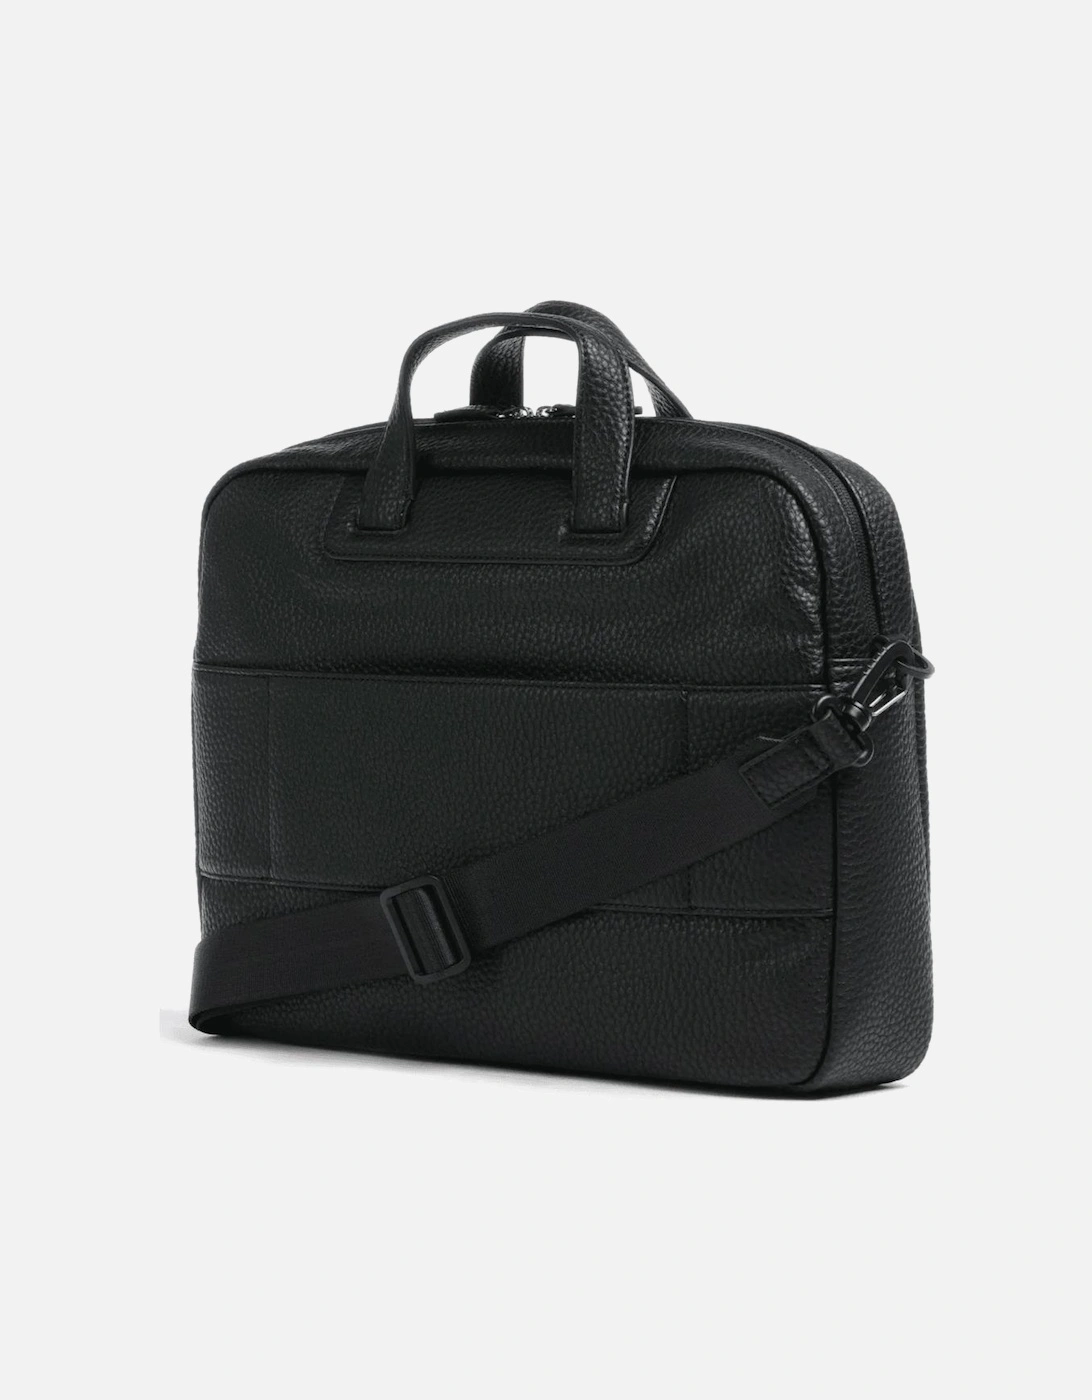 Tumbled Leather Black Briefcase